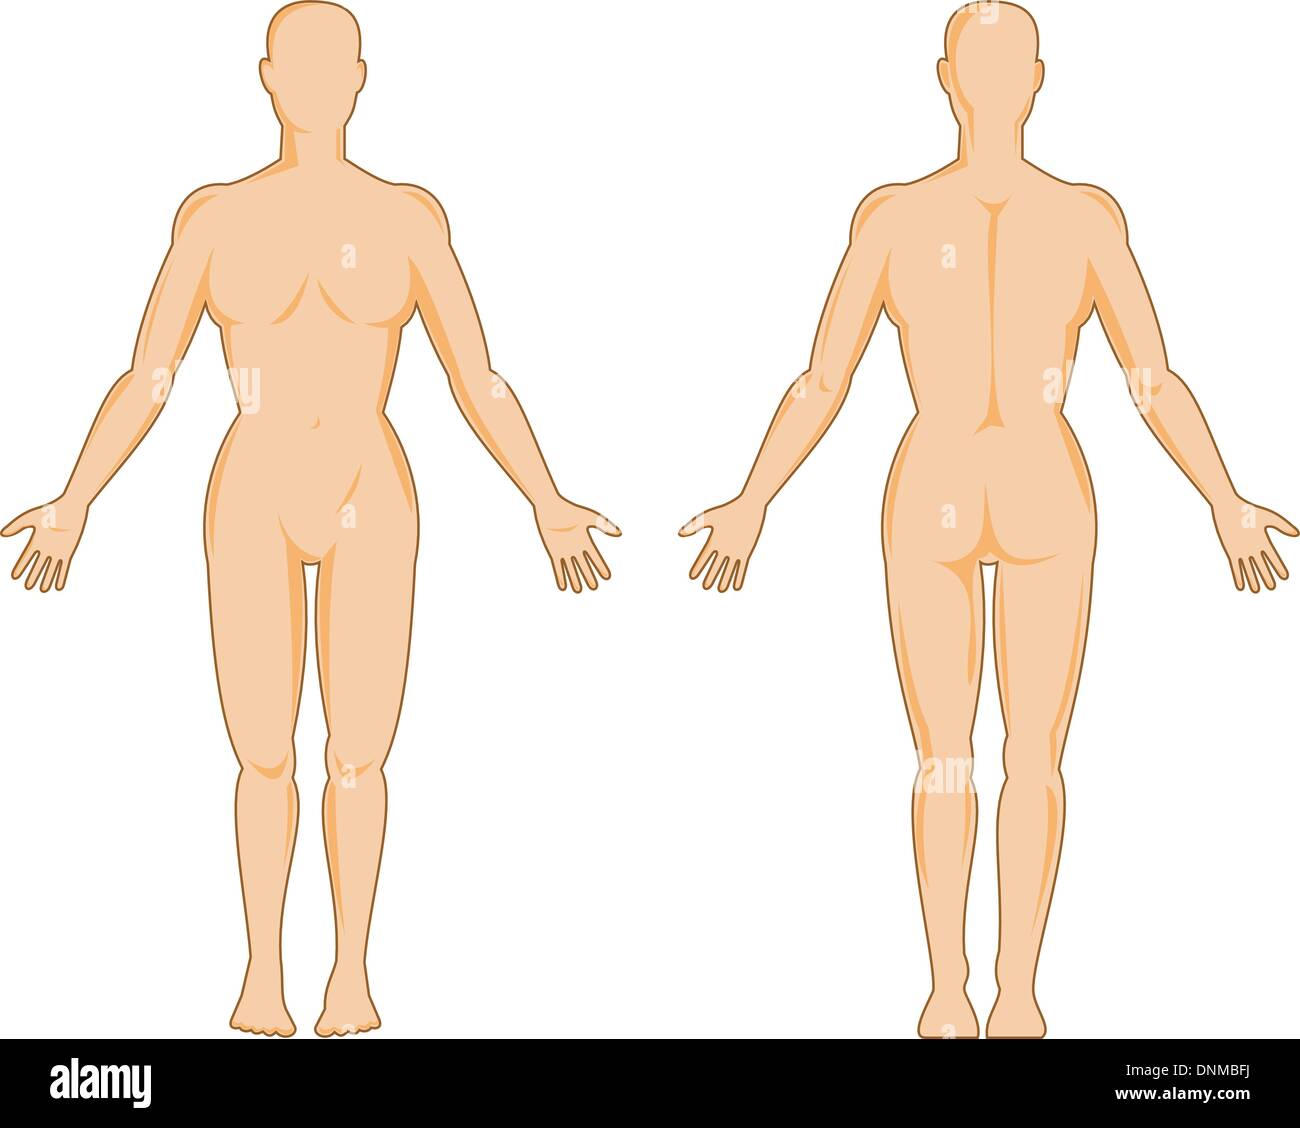 illustration on the human anatomy showing a female standing on isolated background Stock Vector